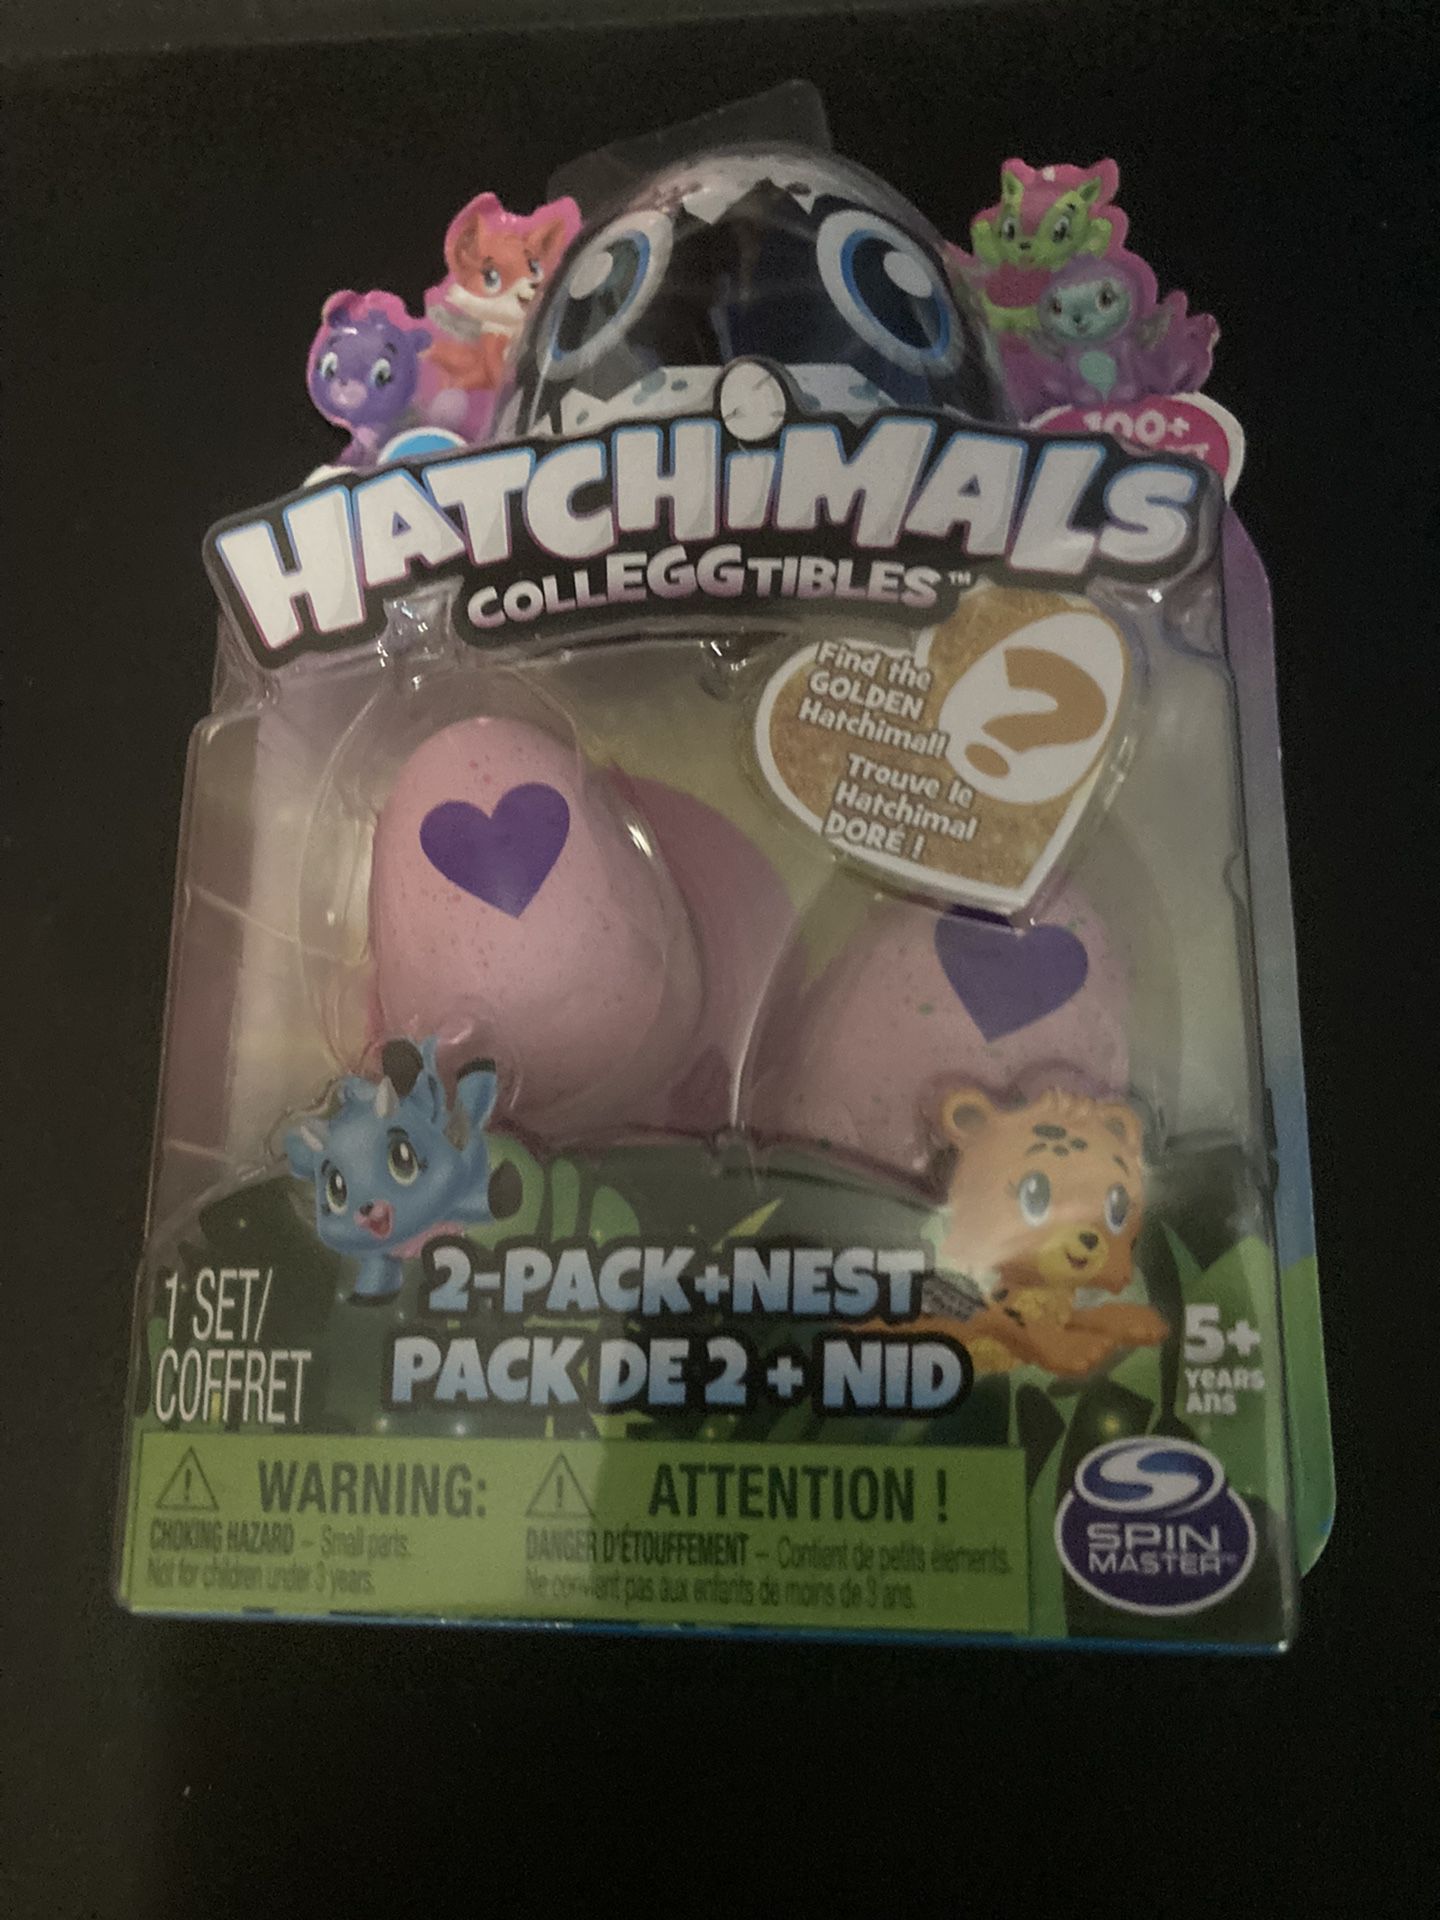 Hatchimals, New, Only $3 per Set, At Least 10 Sets Available 